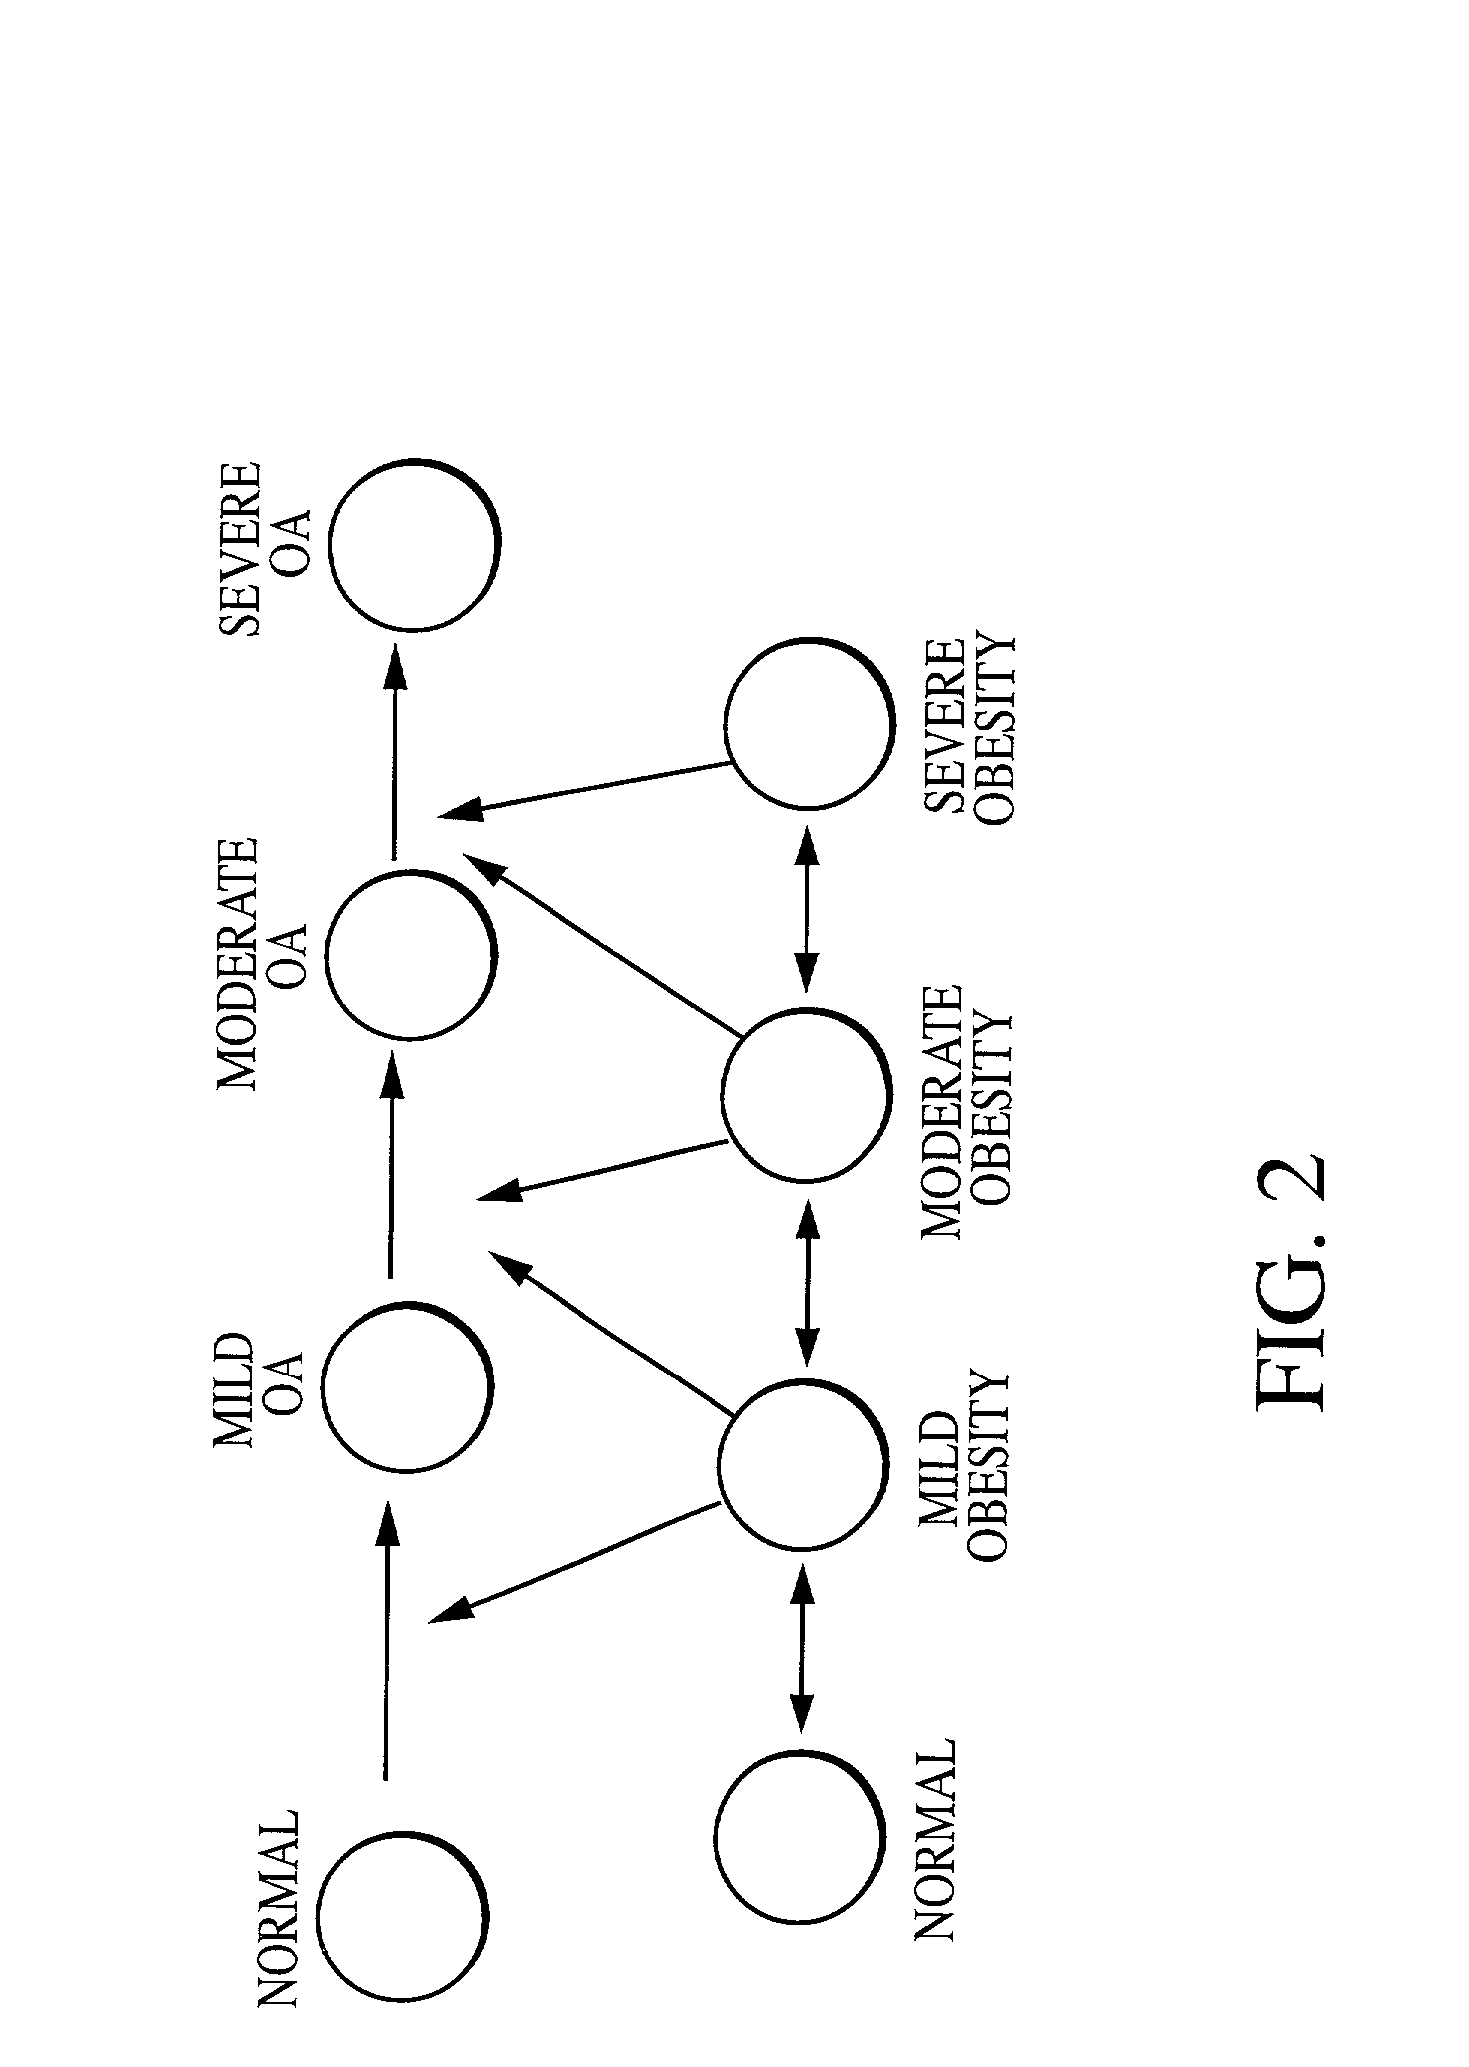 Computer architecture and process of patient generation, evolution, and simulation for computer based testing system